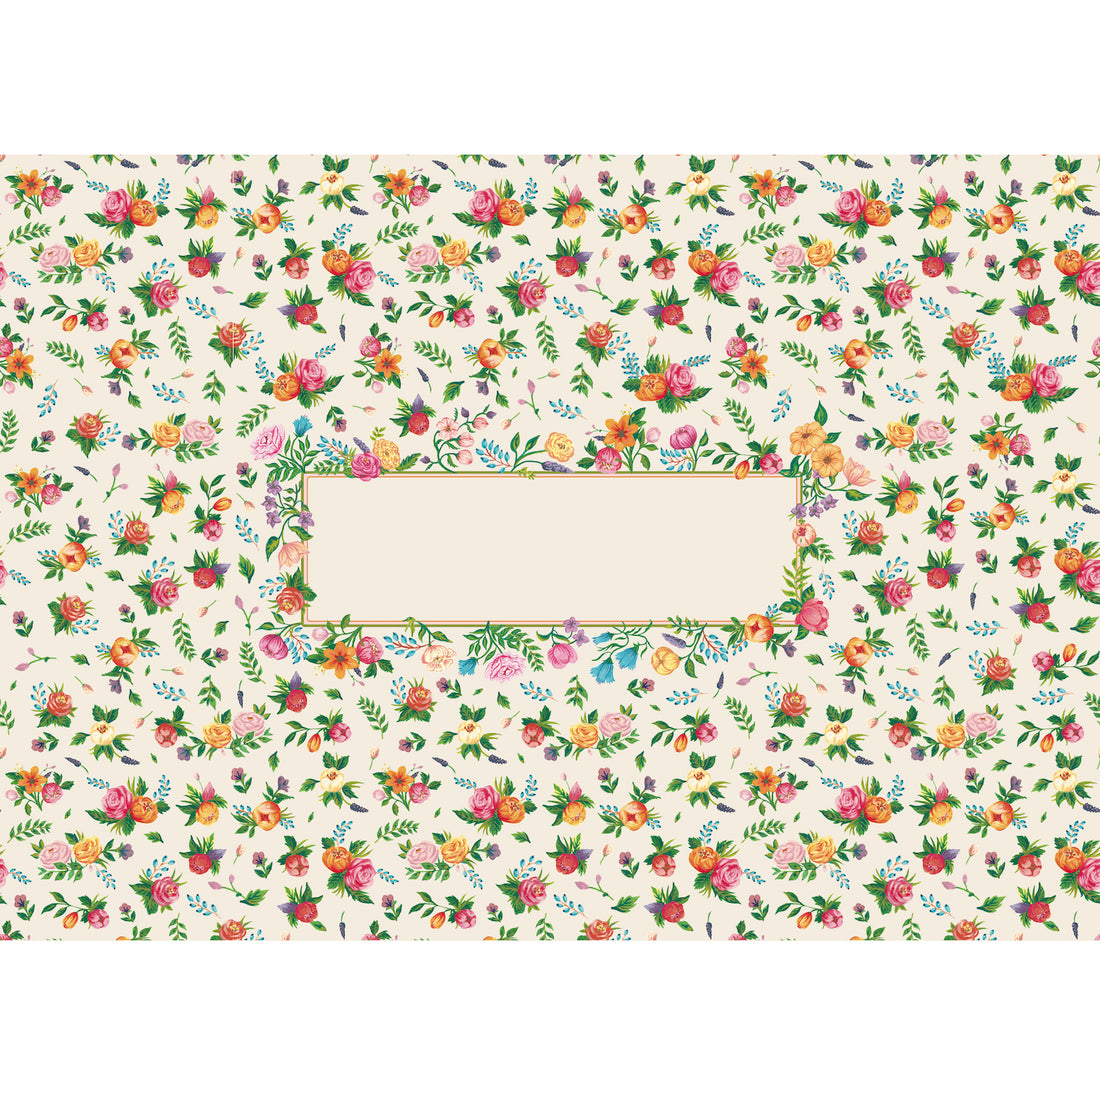 A paper runner roll featuring a pattern of small, illustrated pink and orange flowers and green leaves, scattered on a white background, with a blank open framed area in the center for a personalized message.